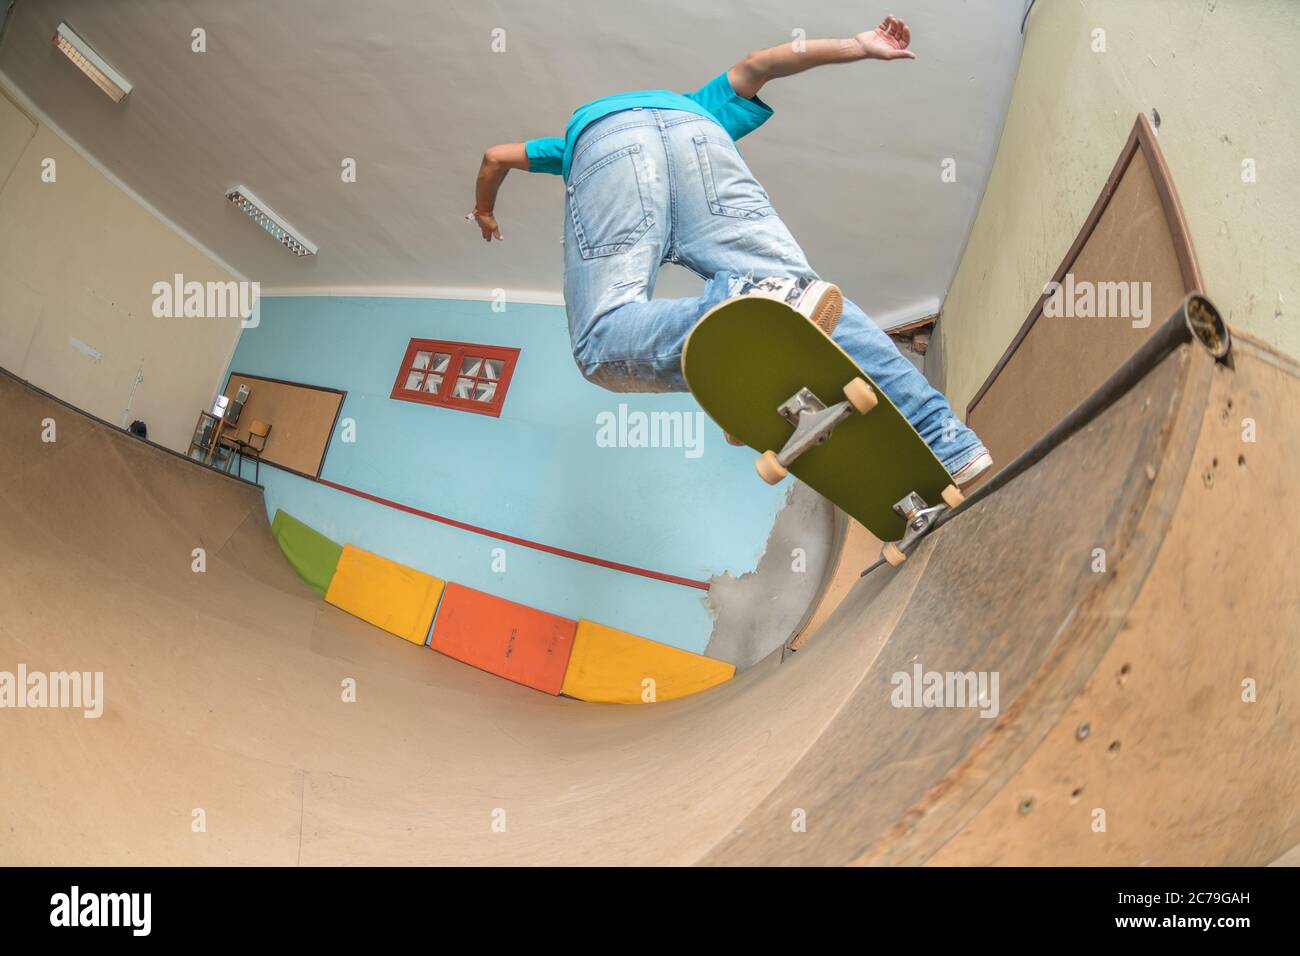 Skateboarder performing a trick on mini ramp at indoor skate park Stock  Photo - Alamy